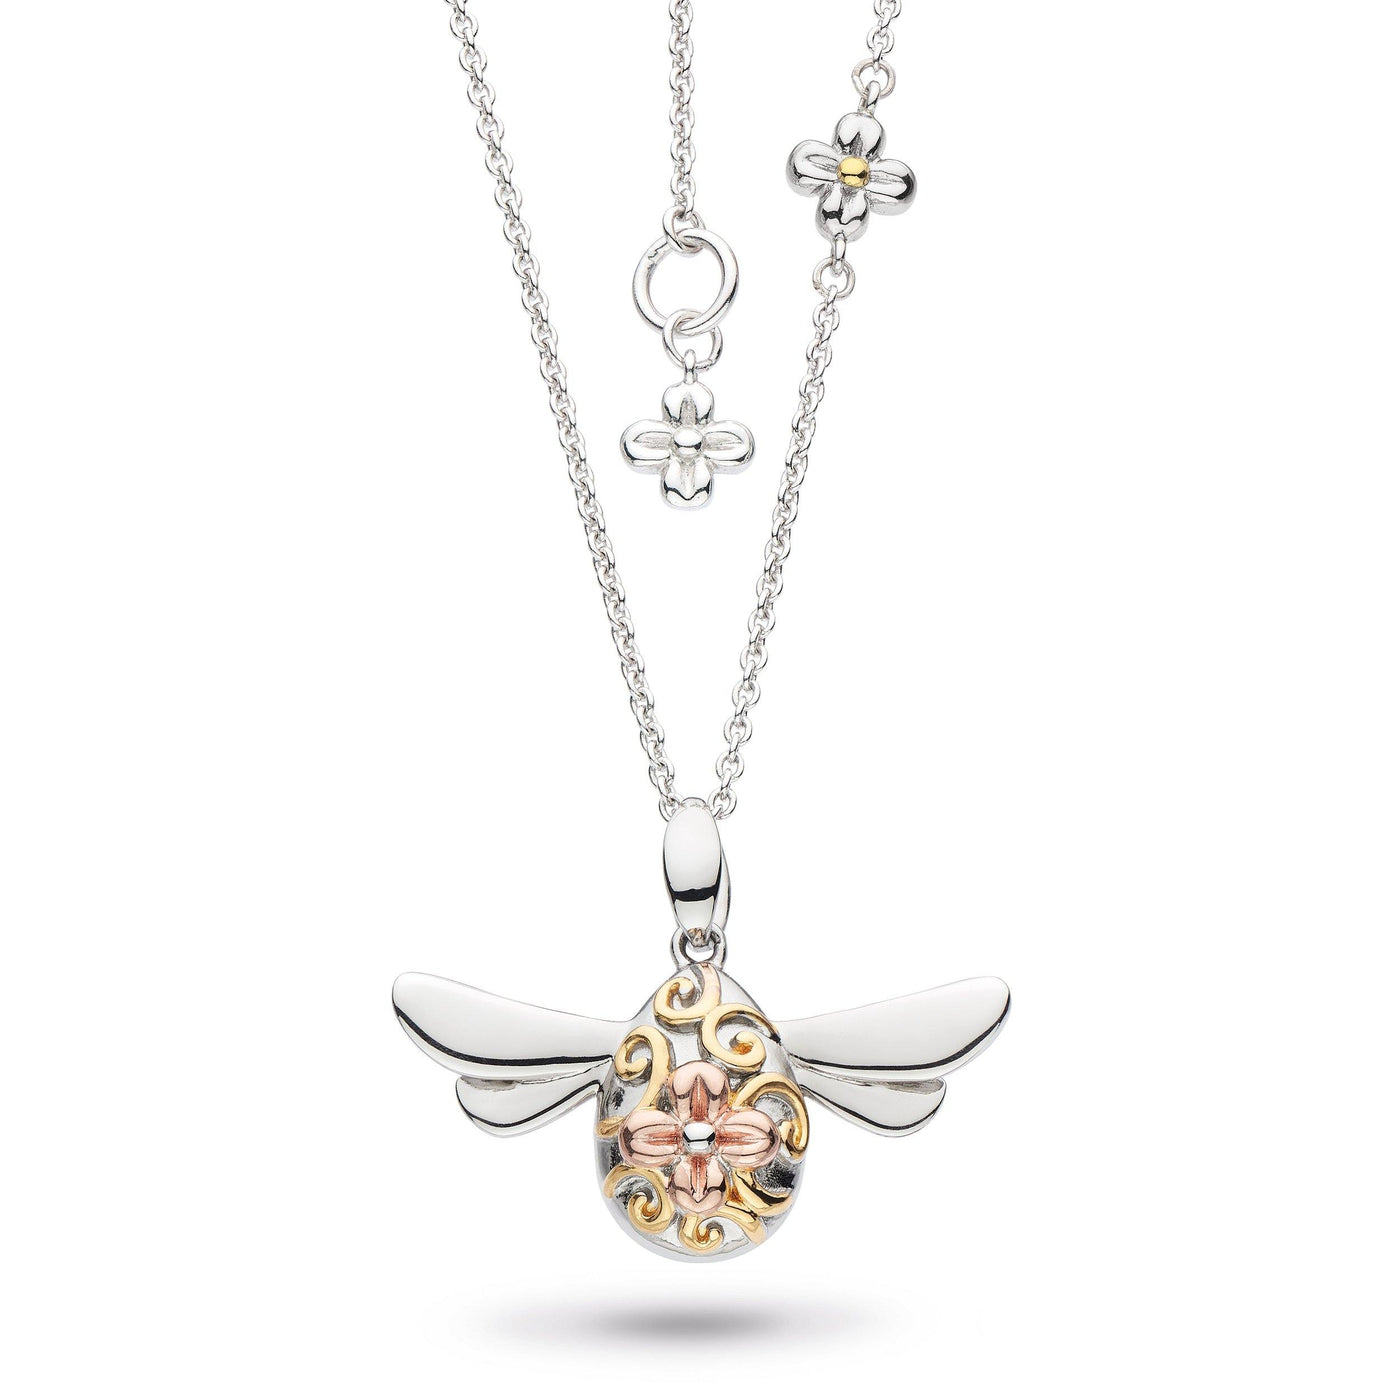 Kit Heath Blossom Flyte The Queen Bee Necklace - Rococo Jewellery